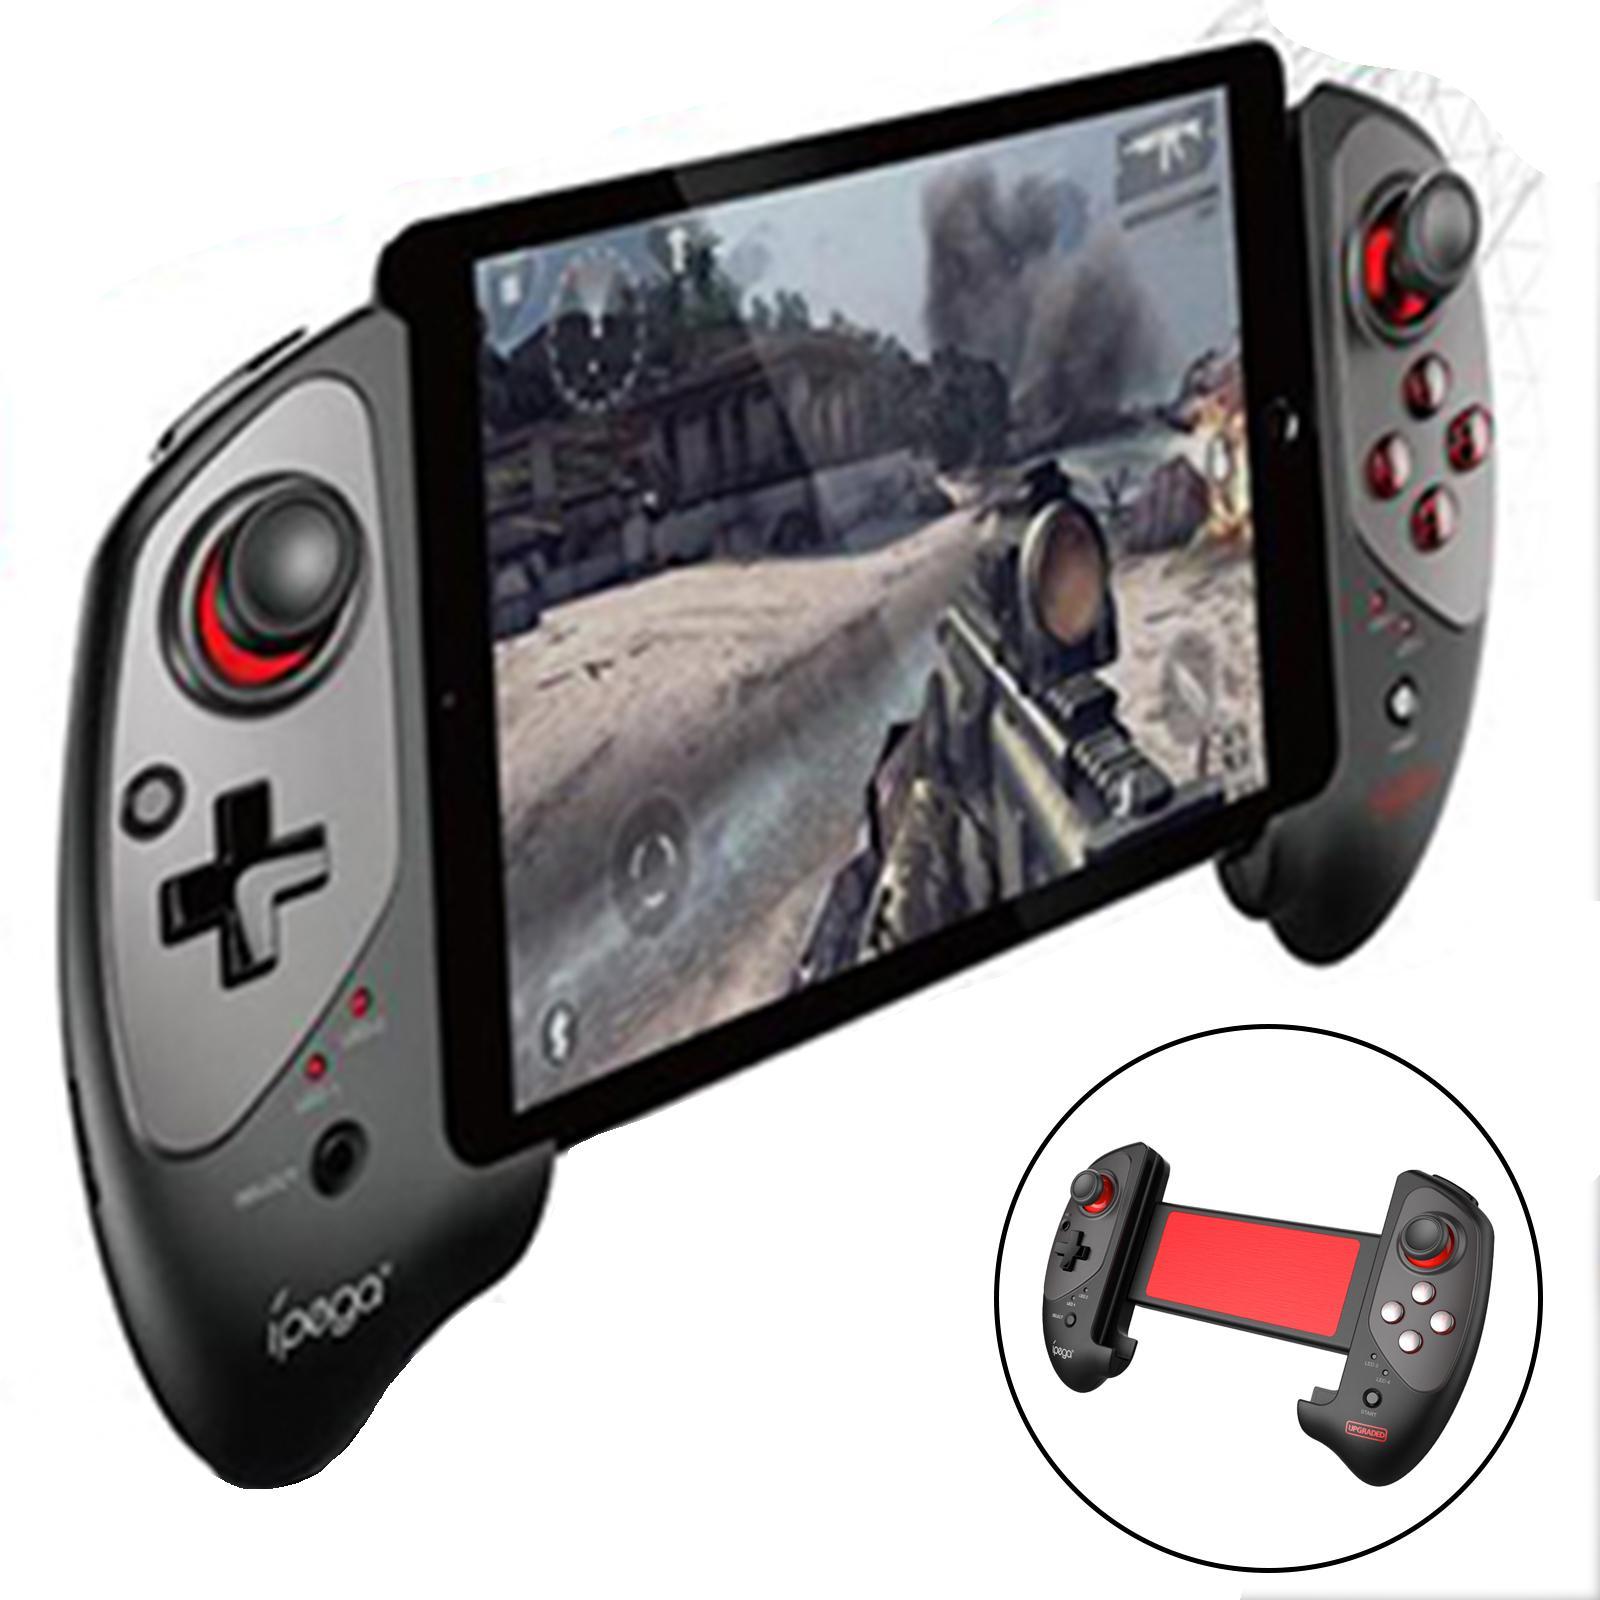 Bluetooth Wireless Game Controller Handle Gamepad for Android/iOS 380mAh